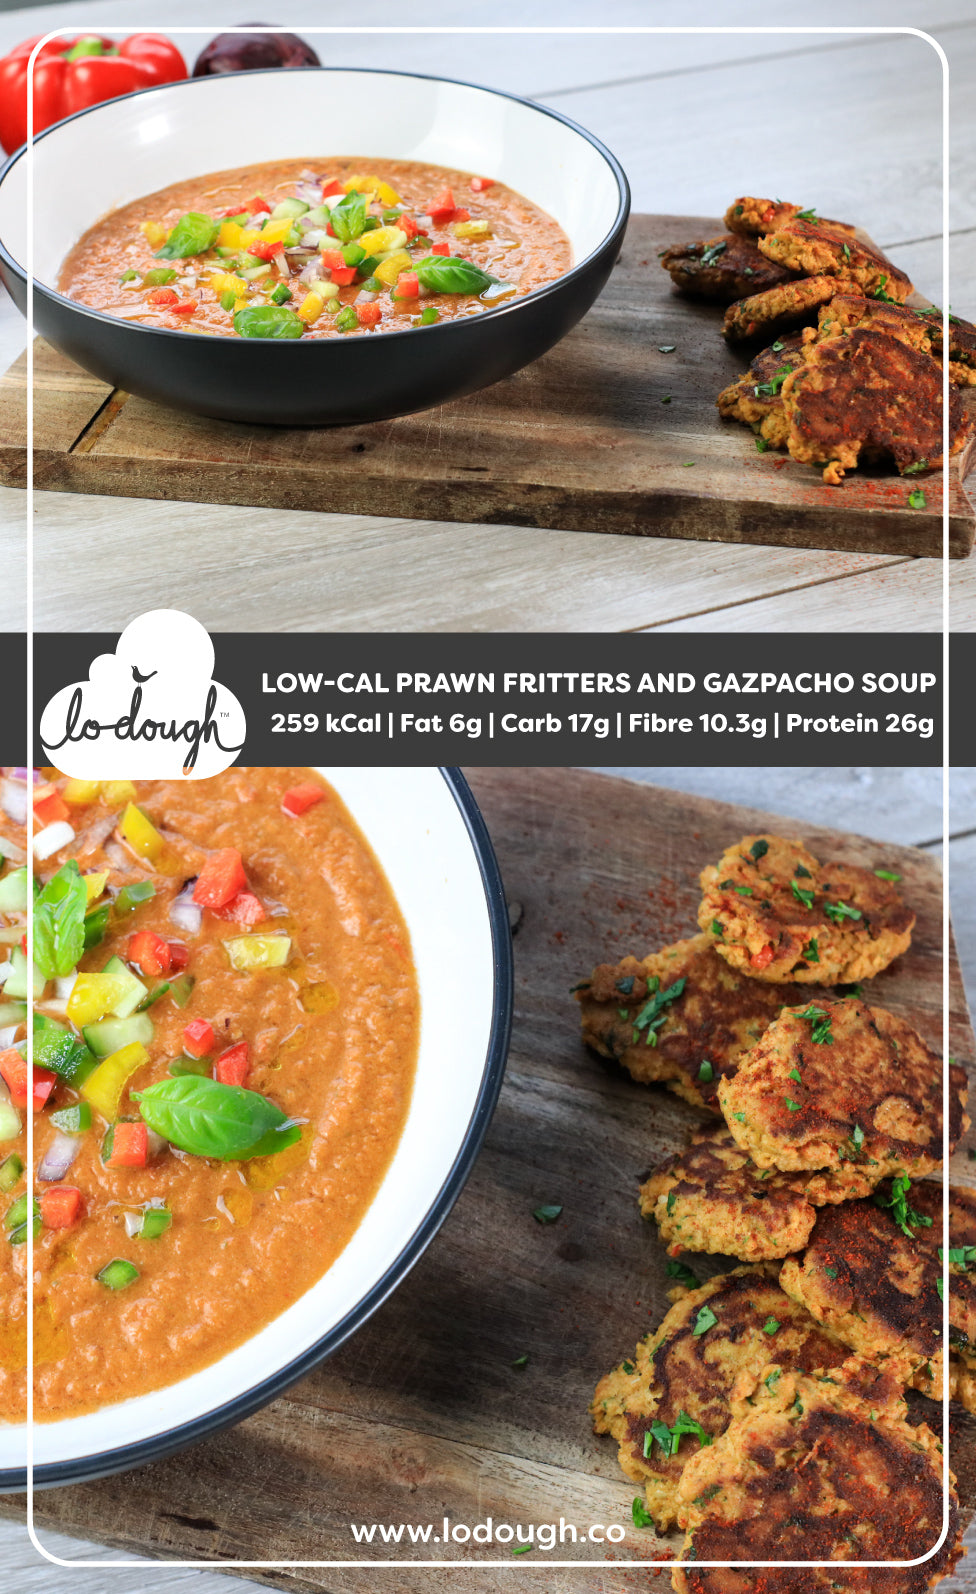 Low-Cal Prawn Fritters and Gazpacho Soup